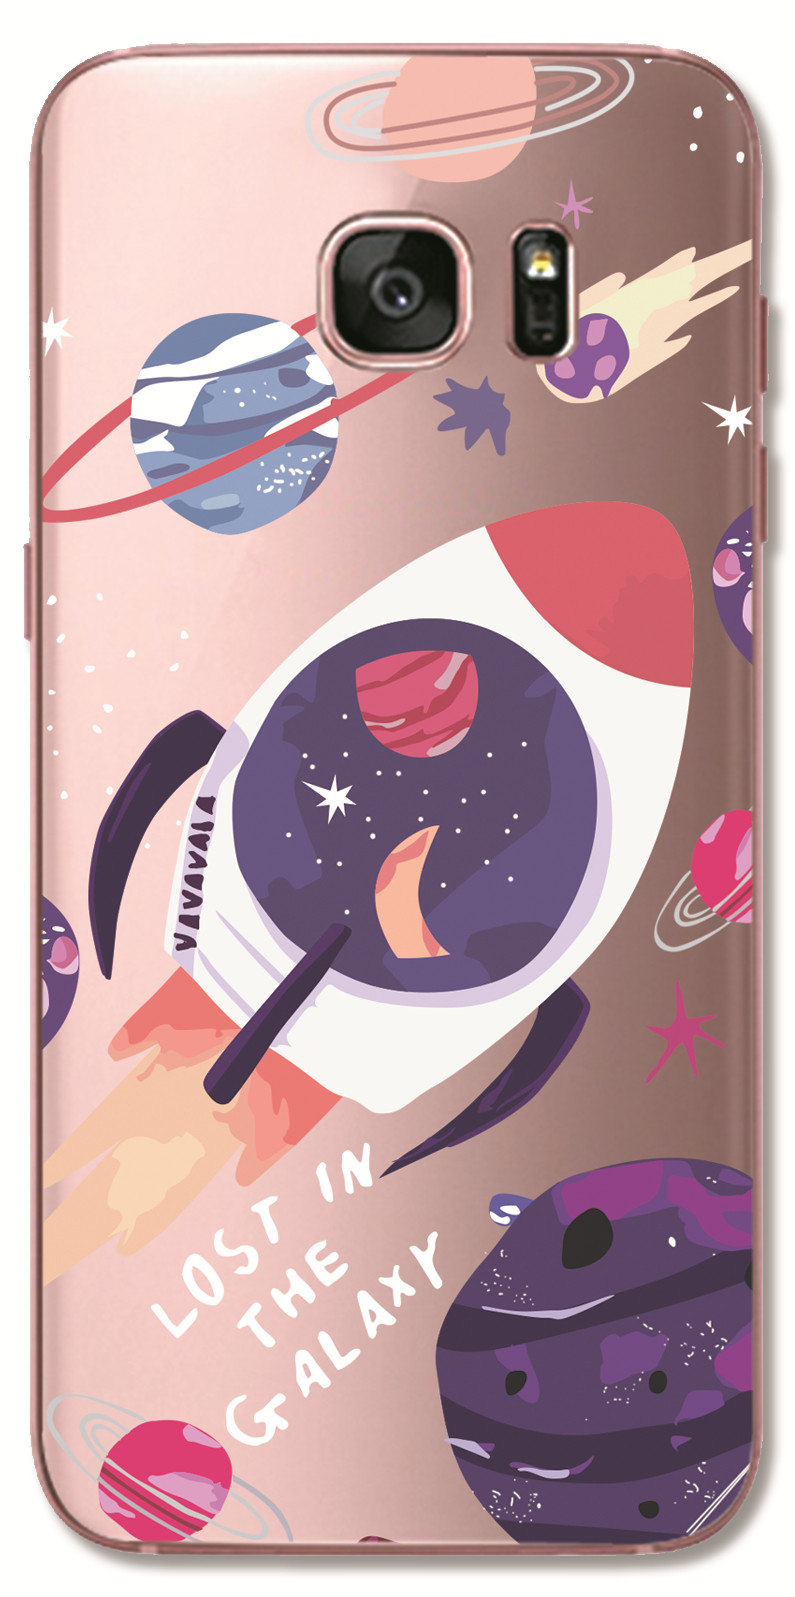 Samsung Galaxy S8 Plus / Note 4 5 3 2 N7100 N9000 INS Cute Cartoon Big eyes furry Monster Clear Soft Silicone TPU Phone Casing Lovely Space Astronaut Spaceship Case Back Cover Couple